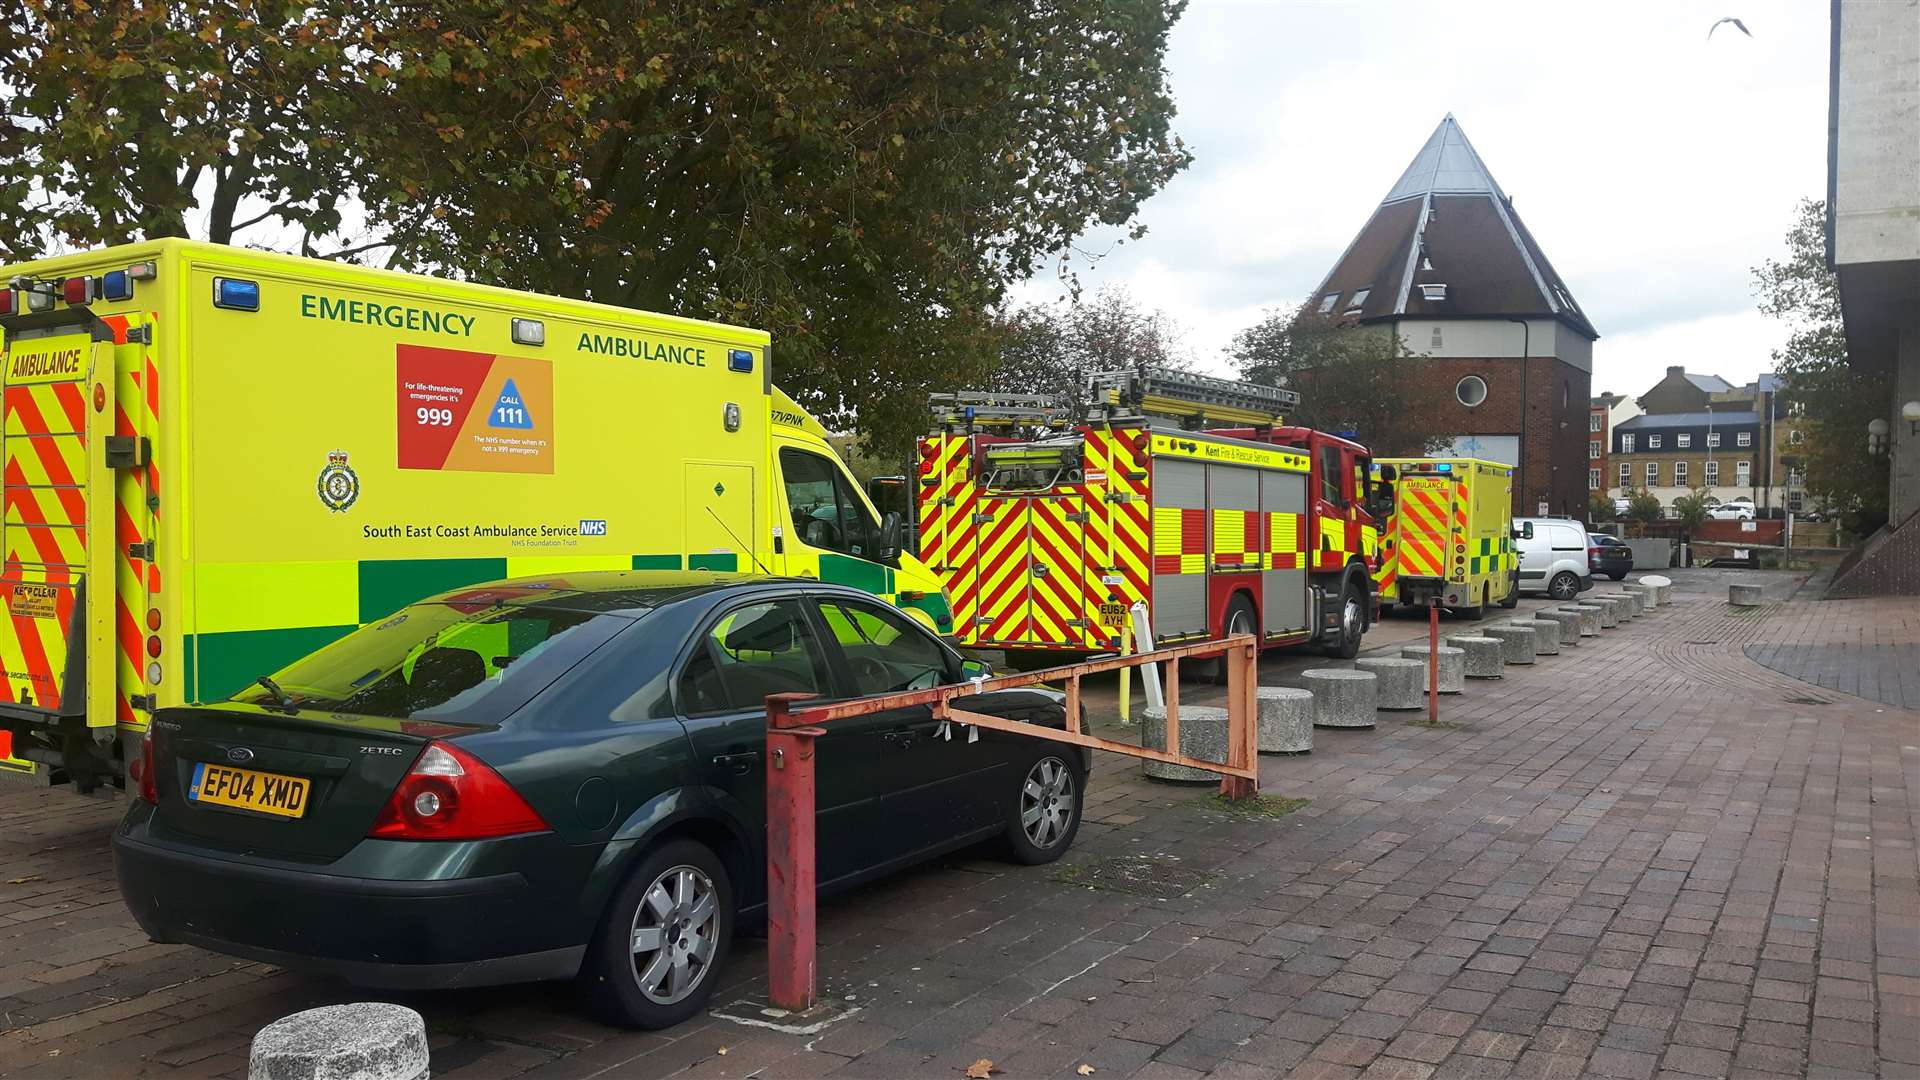 Fire and ambulance crews called to incident near Barker Road